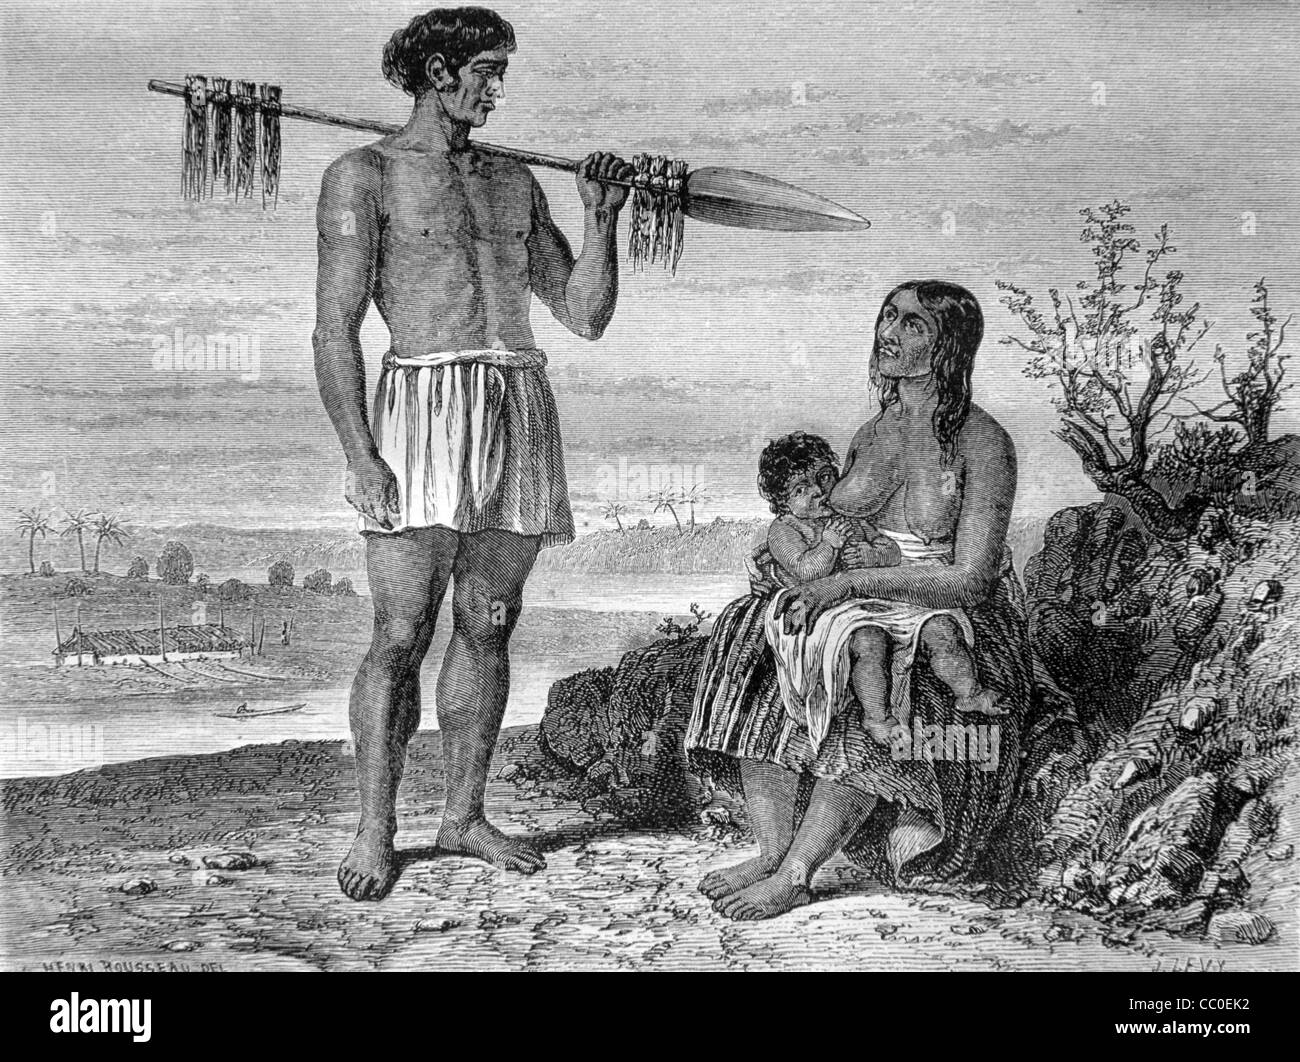 Family of Native American Guarani Indians, Hunter Man with Speed and Woman or Mother with Child, Paraguay, South America. 1868 Engraving or Vintage Illustration Stock Photo